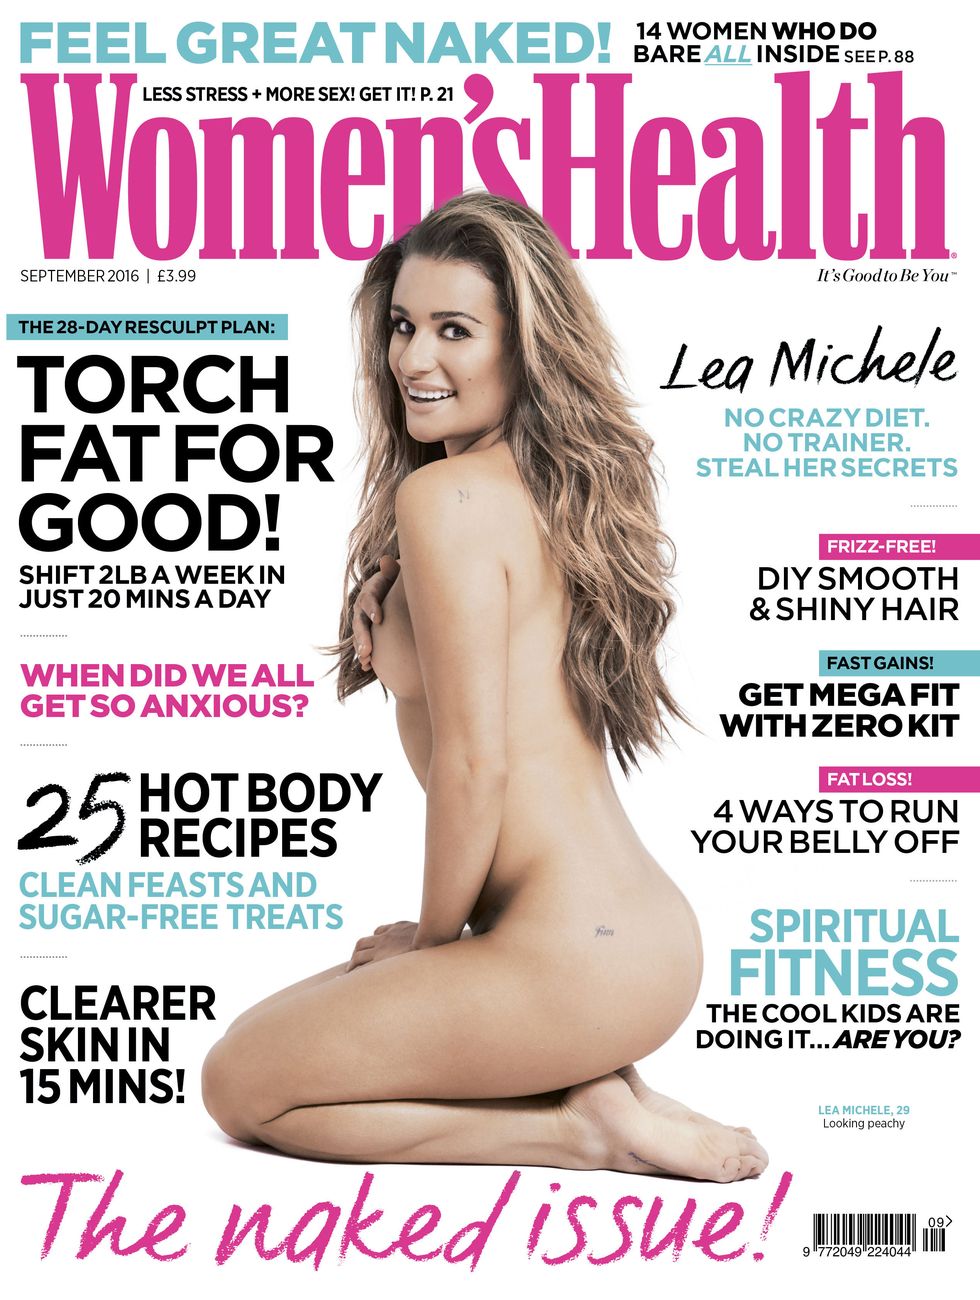 clever bere recommends lea michele naked pic